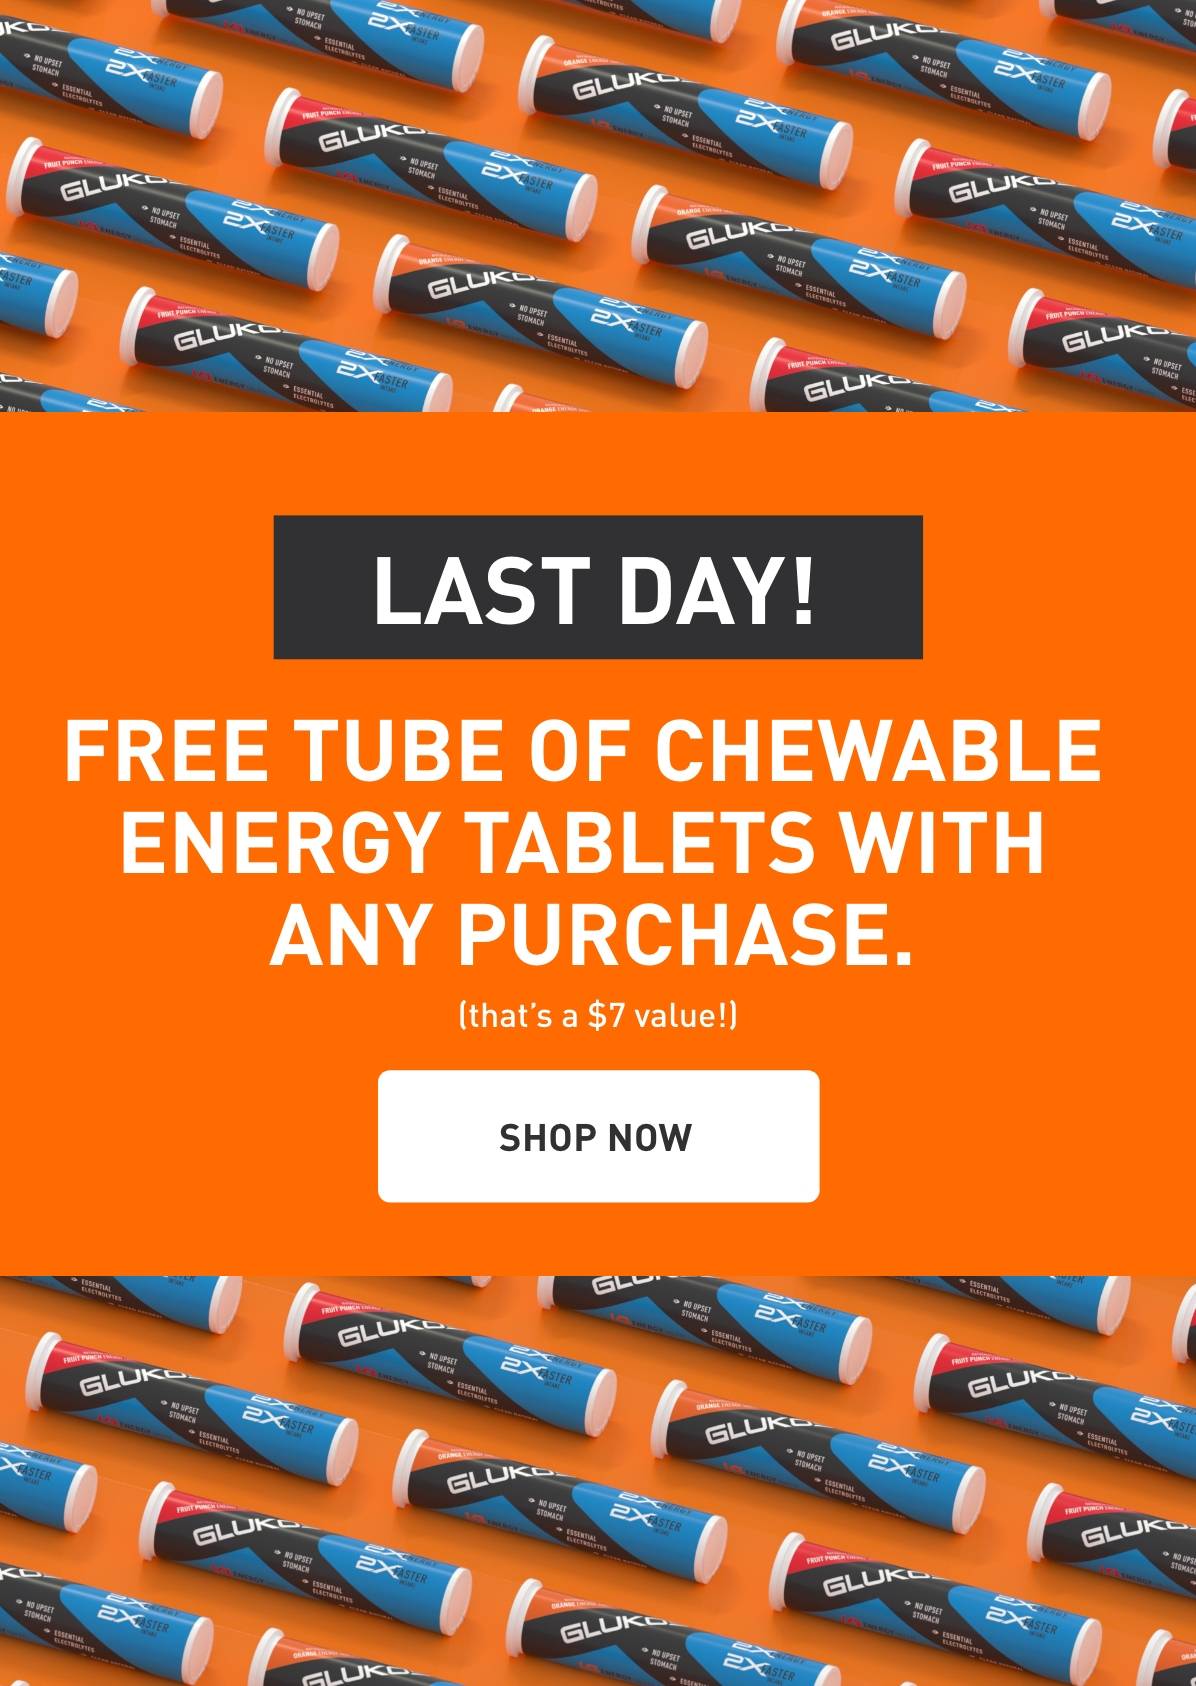 Last Day! Free tube of chewable energy tablets with any purchase. (that's a $7 value!) SHOP NOW